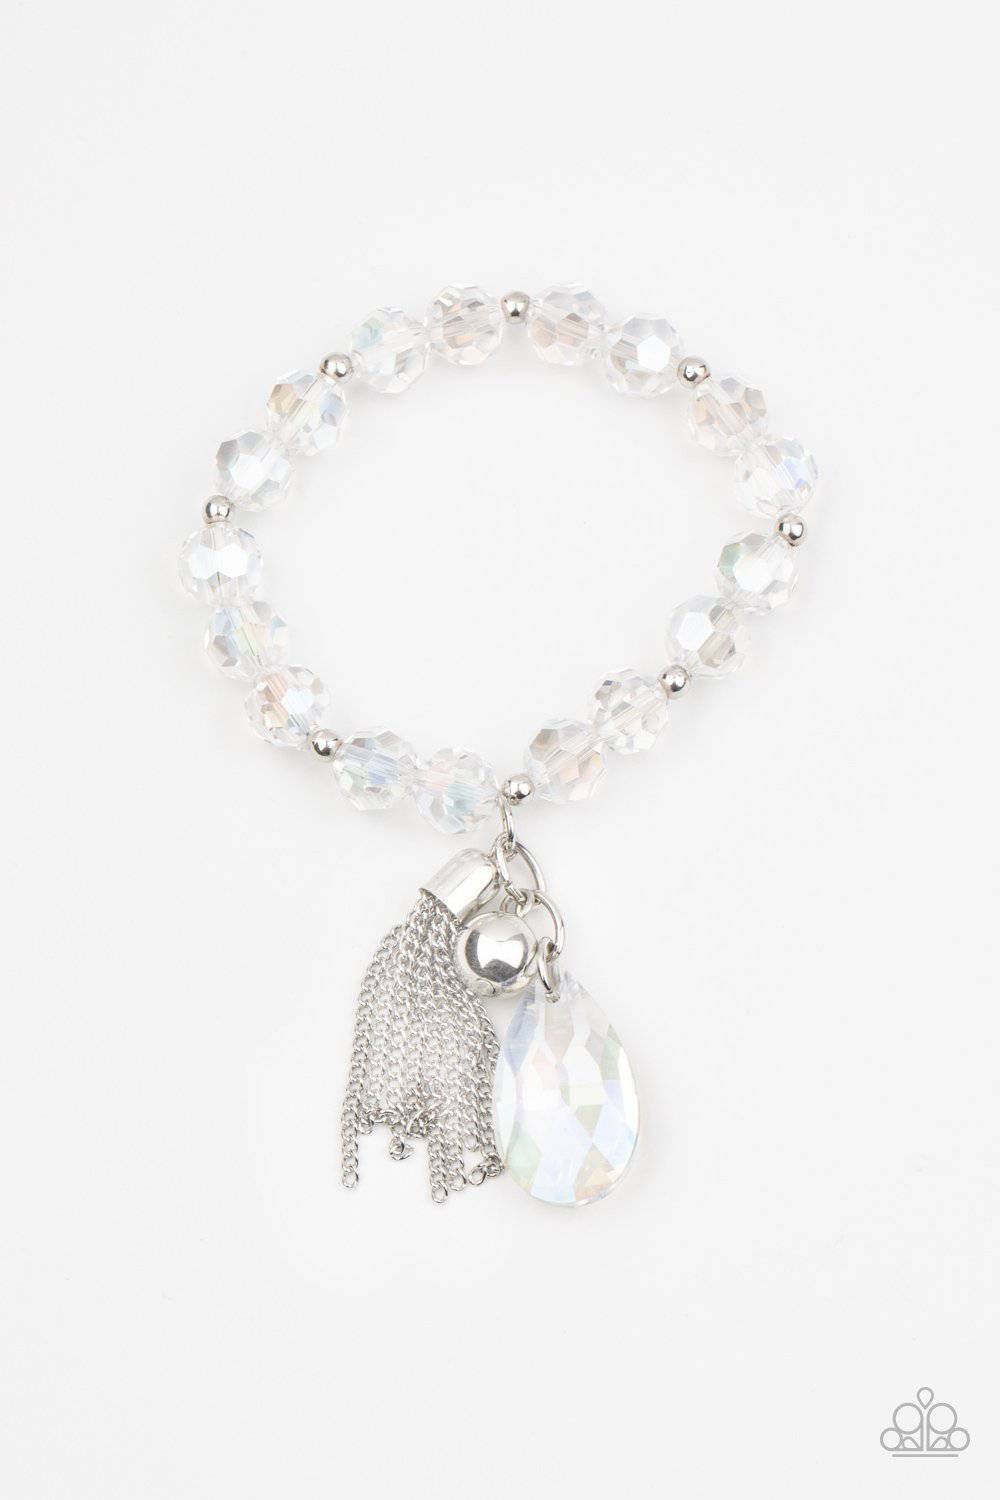 Leaving So SWOON? - White Stretchy Teardrop Crystal Bracelet - Paparazzi Accessories - GlaMarous Titi Jewels